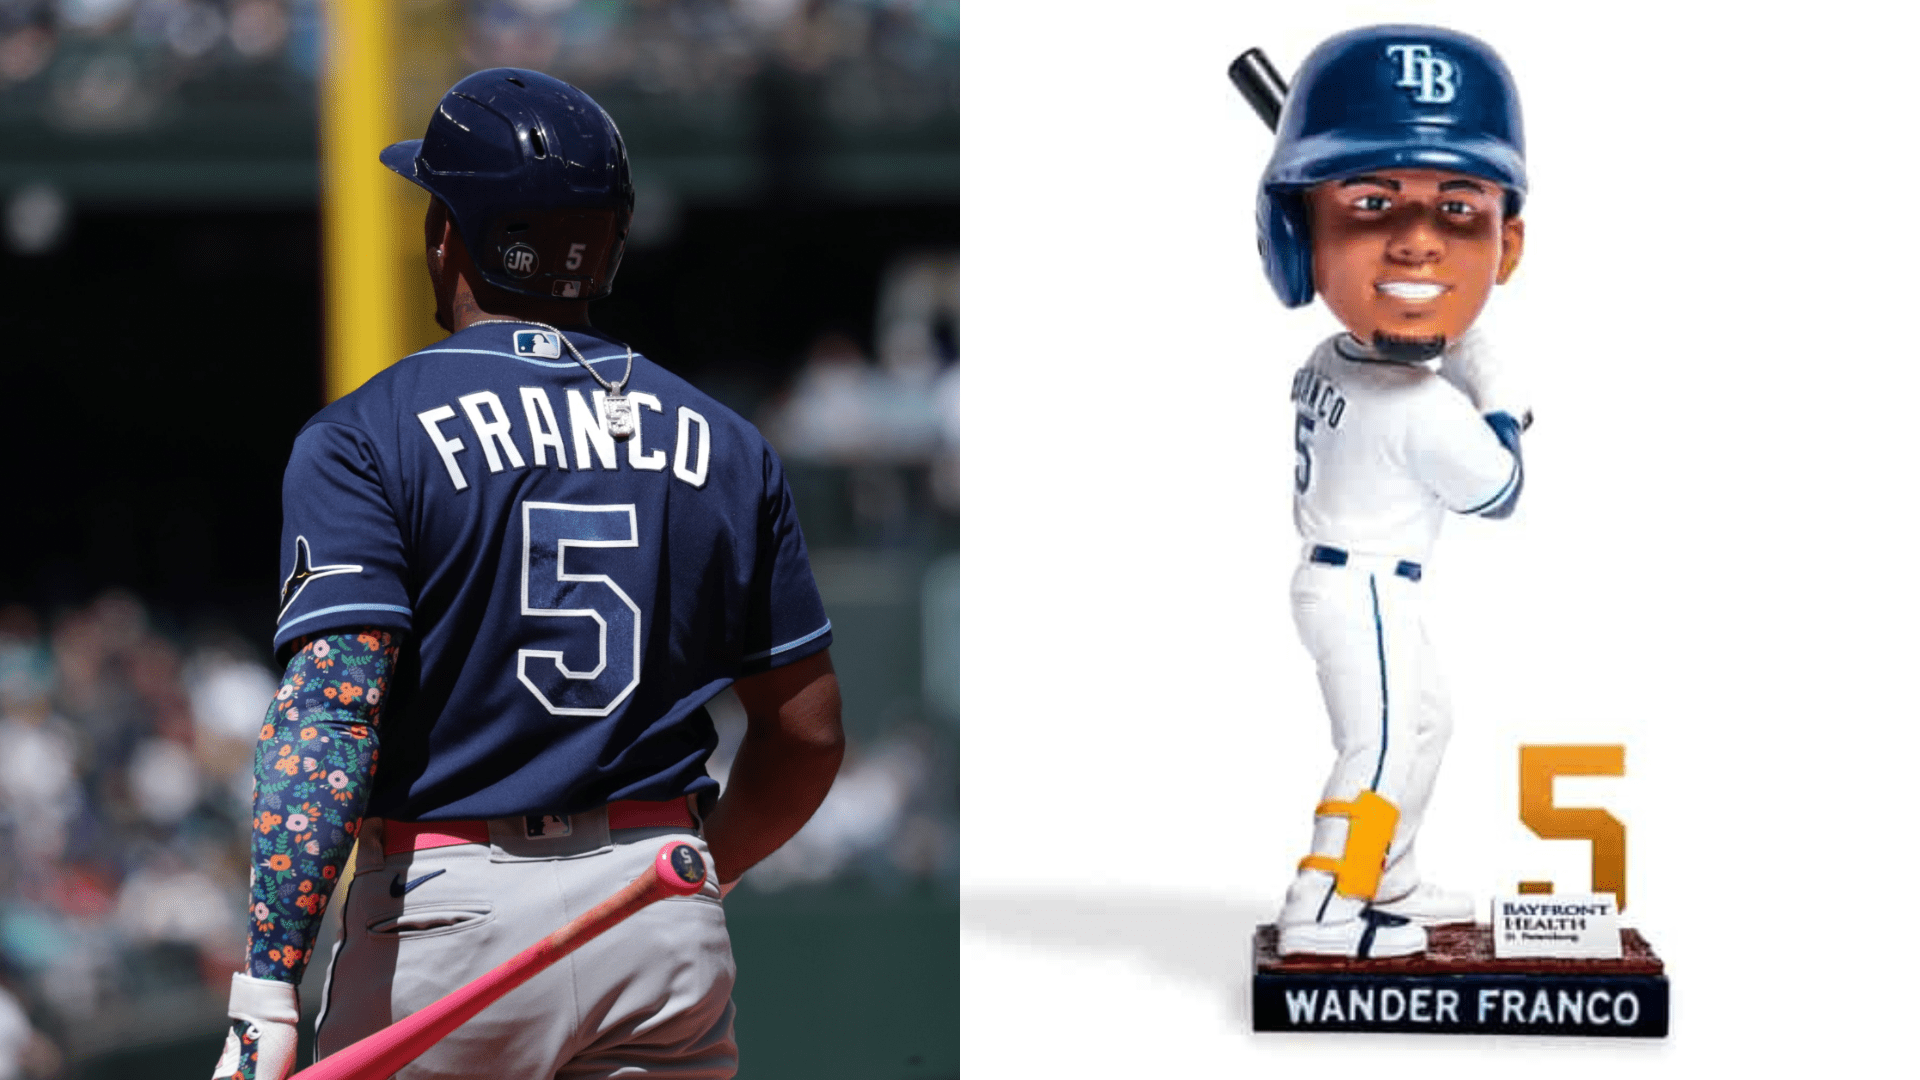 Rays announce Wander Franco NFT and bobblehead giveaway for Saturday